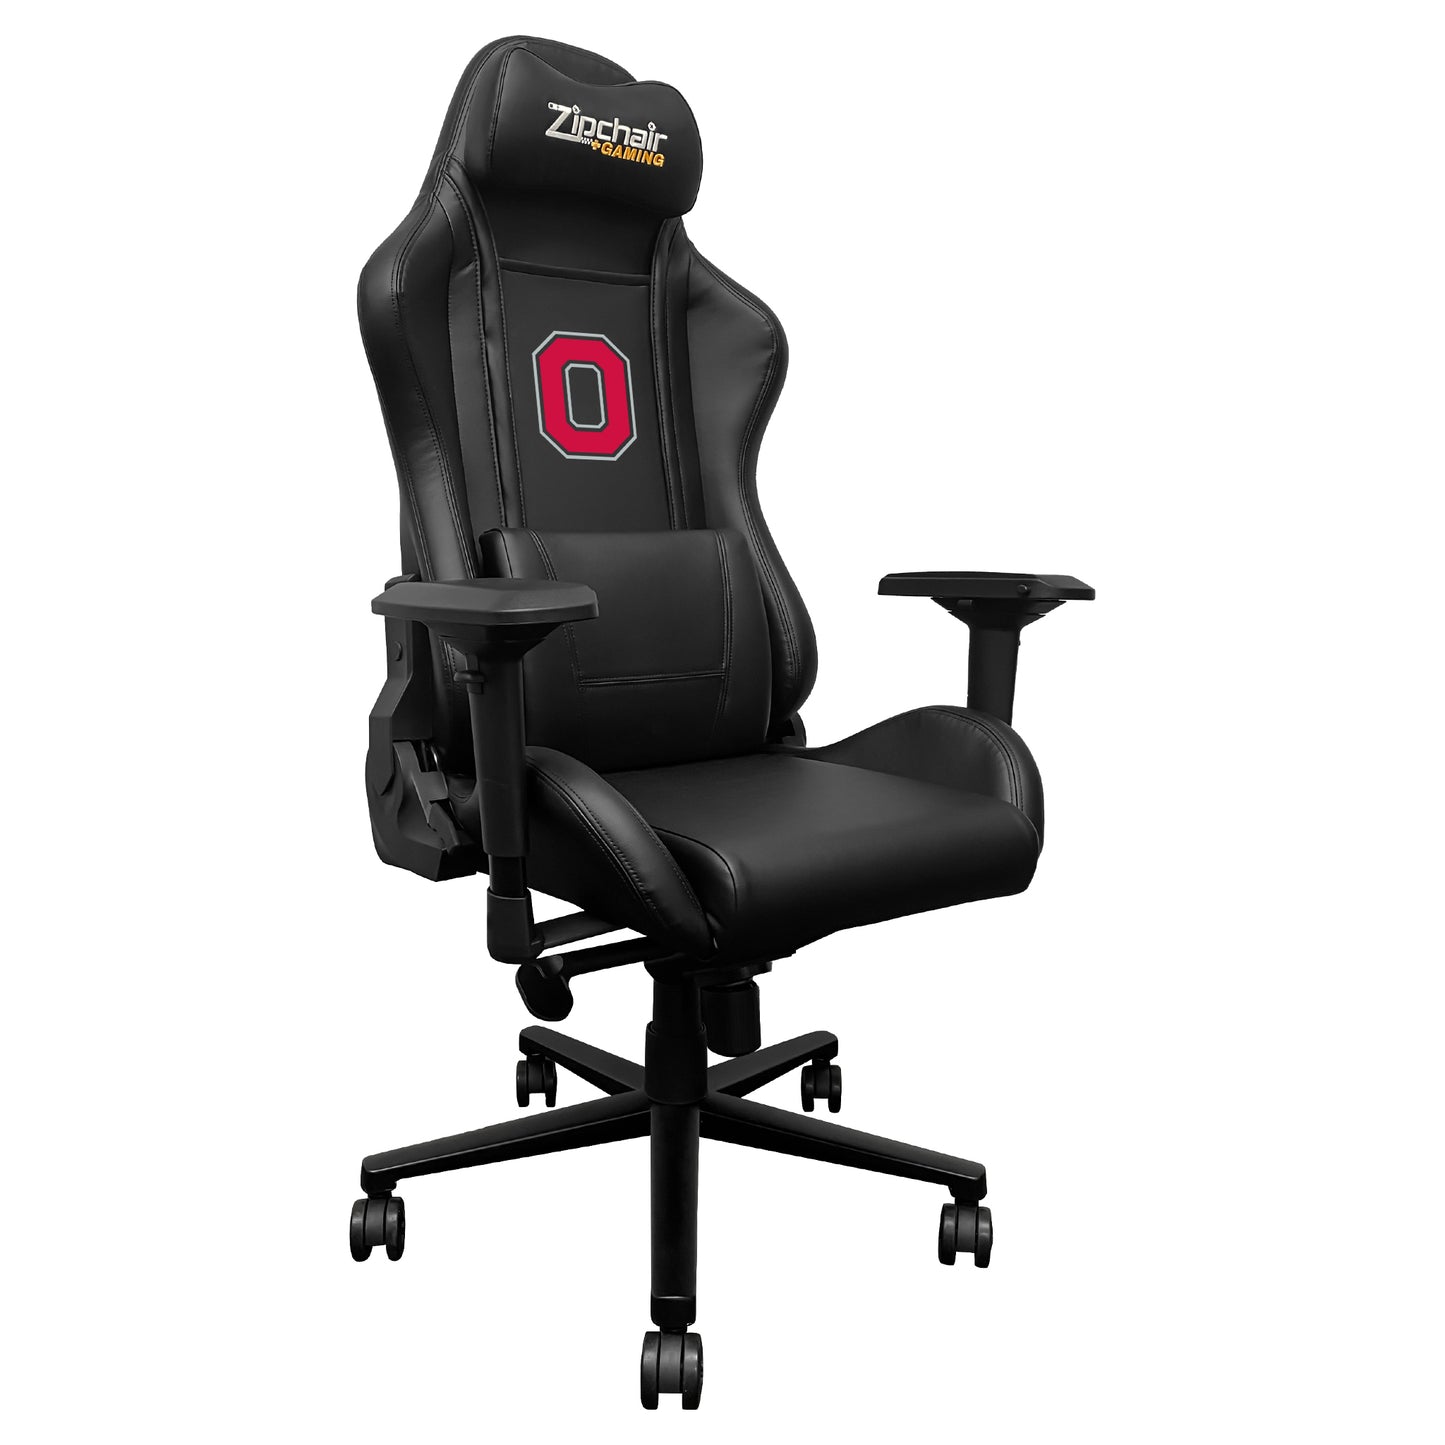 Xpression Pro Gaming Chair with Ohio State University with Buckeyes Block O Logo